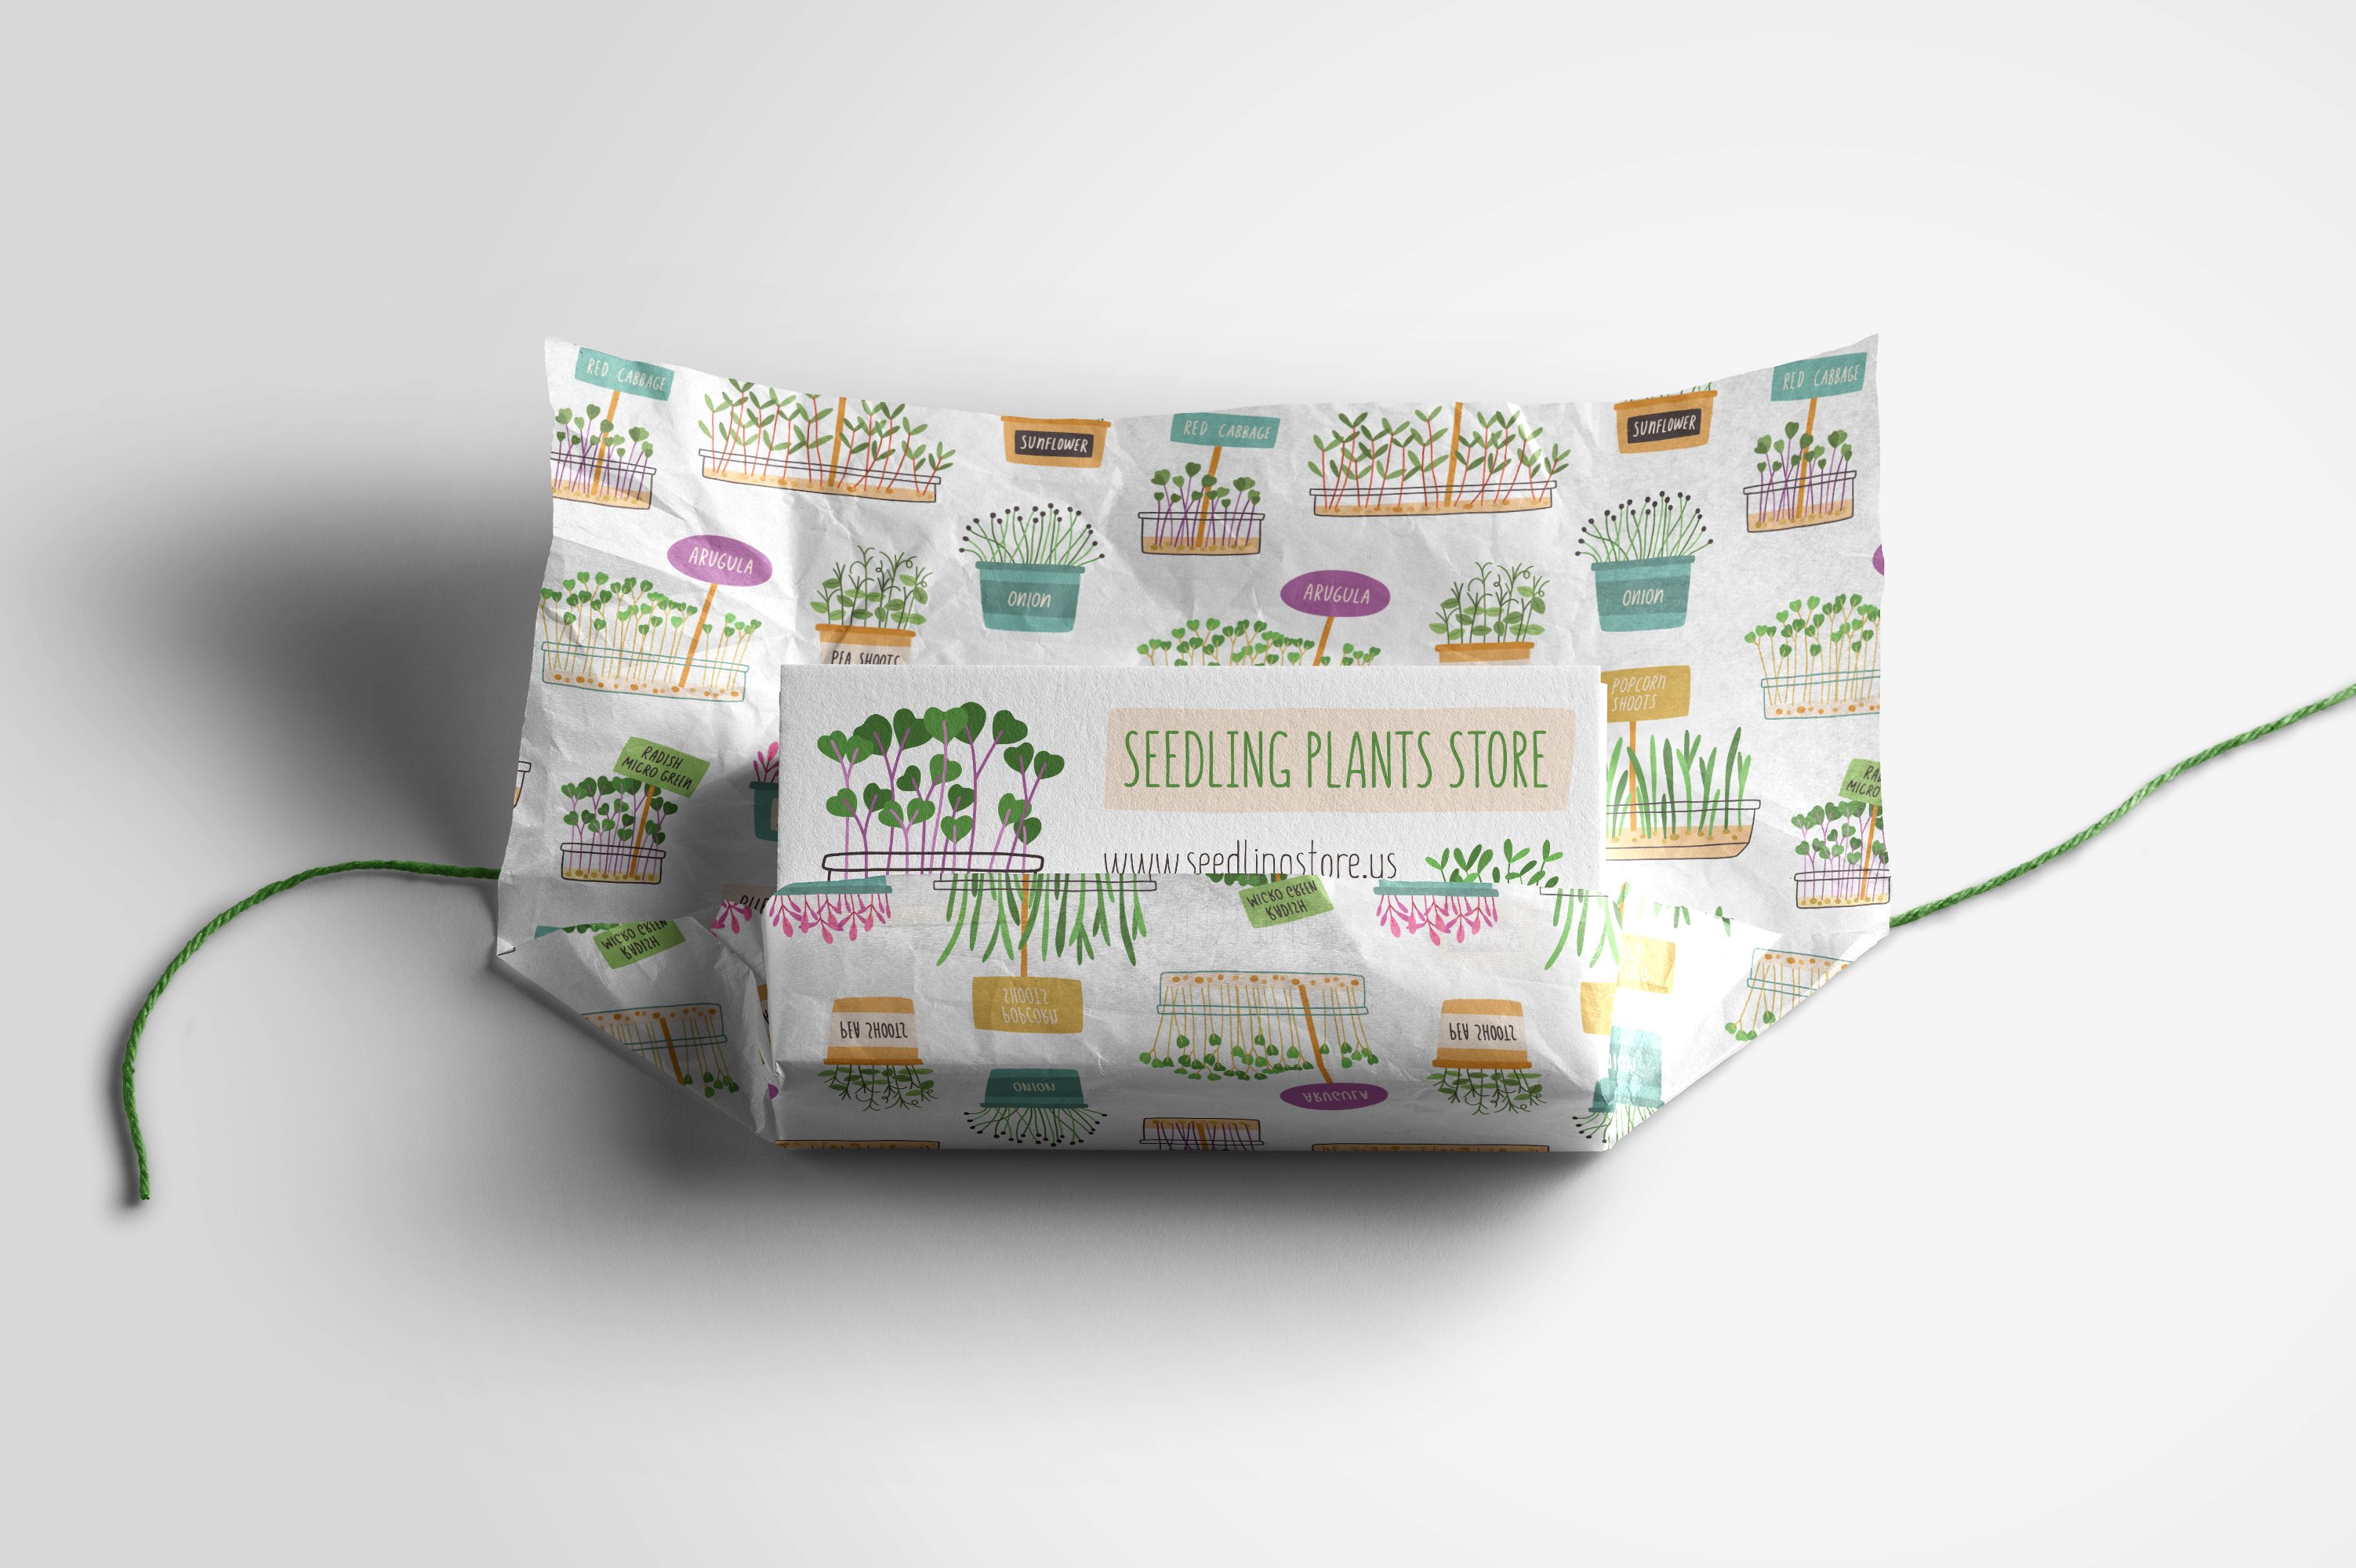 Paper bag with plants printed on it.